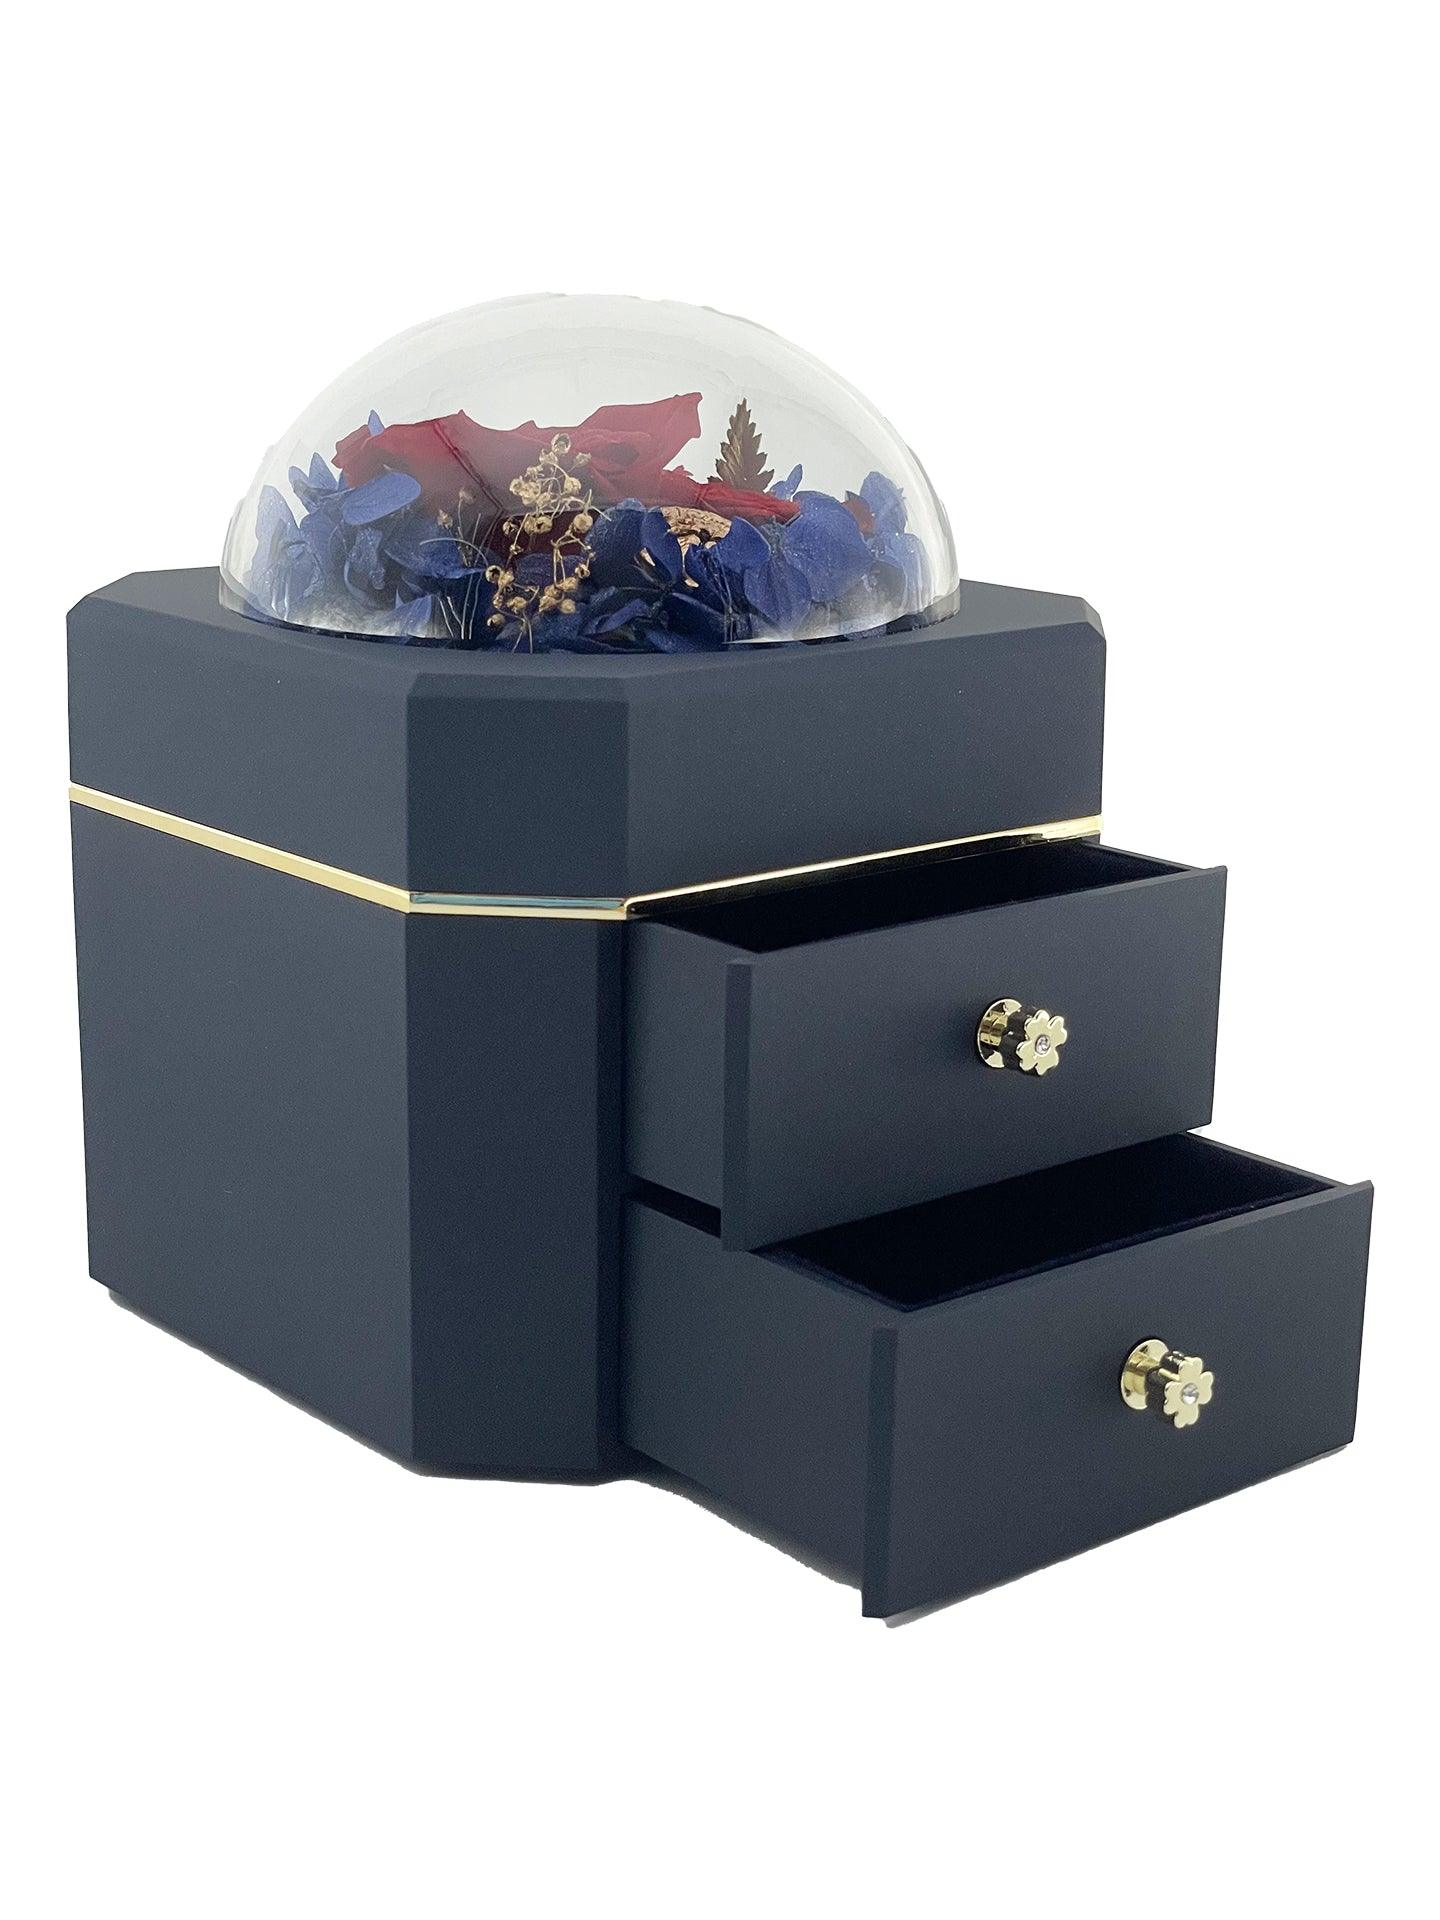 Surprise your loved one with this stunning box of preserved roses and jewellery drawers, available for same-day delivery in Melbourne, VIC, Australia.